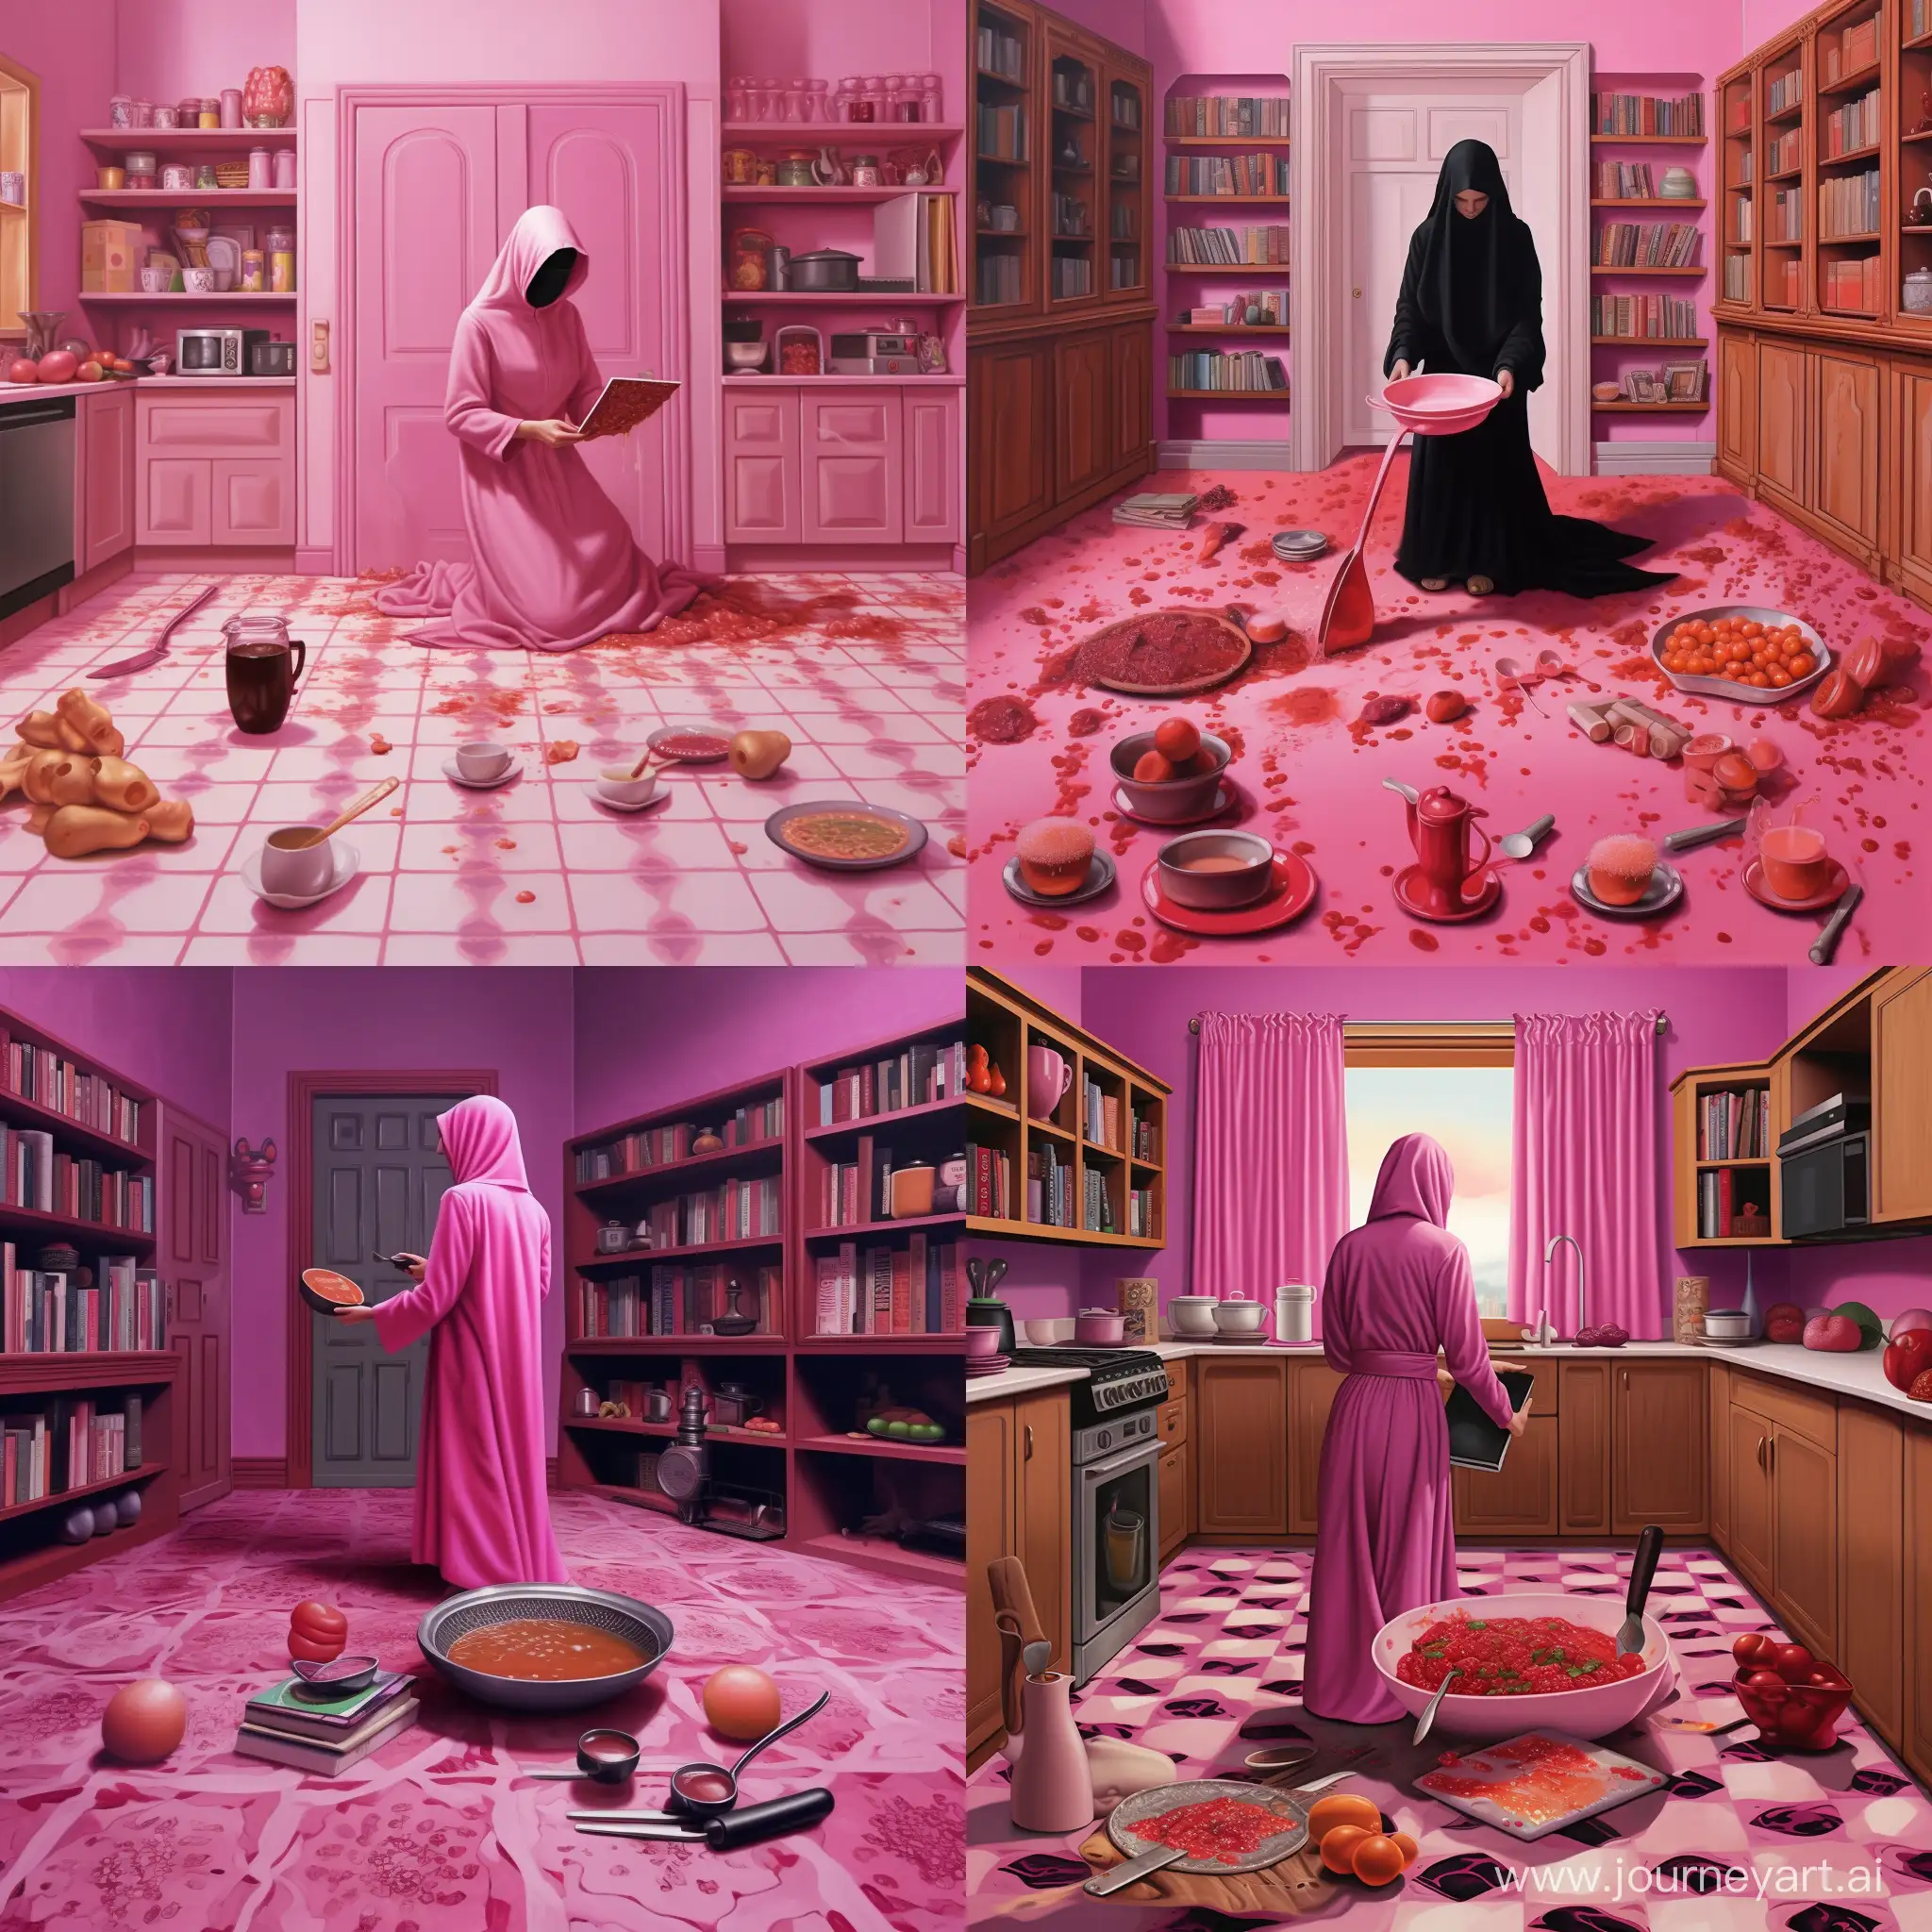 a woman in a pink burqa without a face is standing in a pink room, she has a whisk for a mixer in her hands, she is a pastry chef,there is a cupboard in the room there are various pink books on the floor there are white tiles